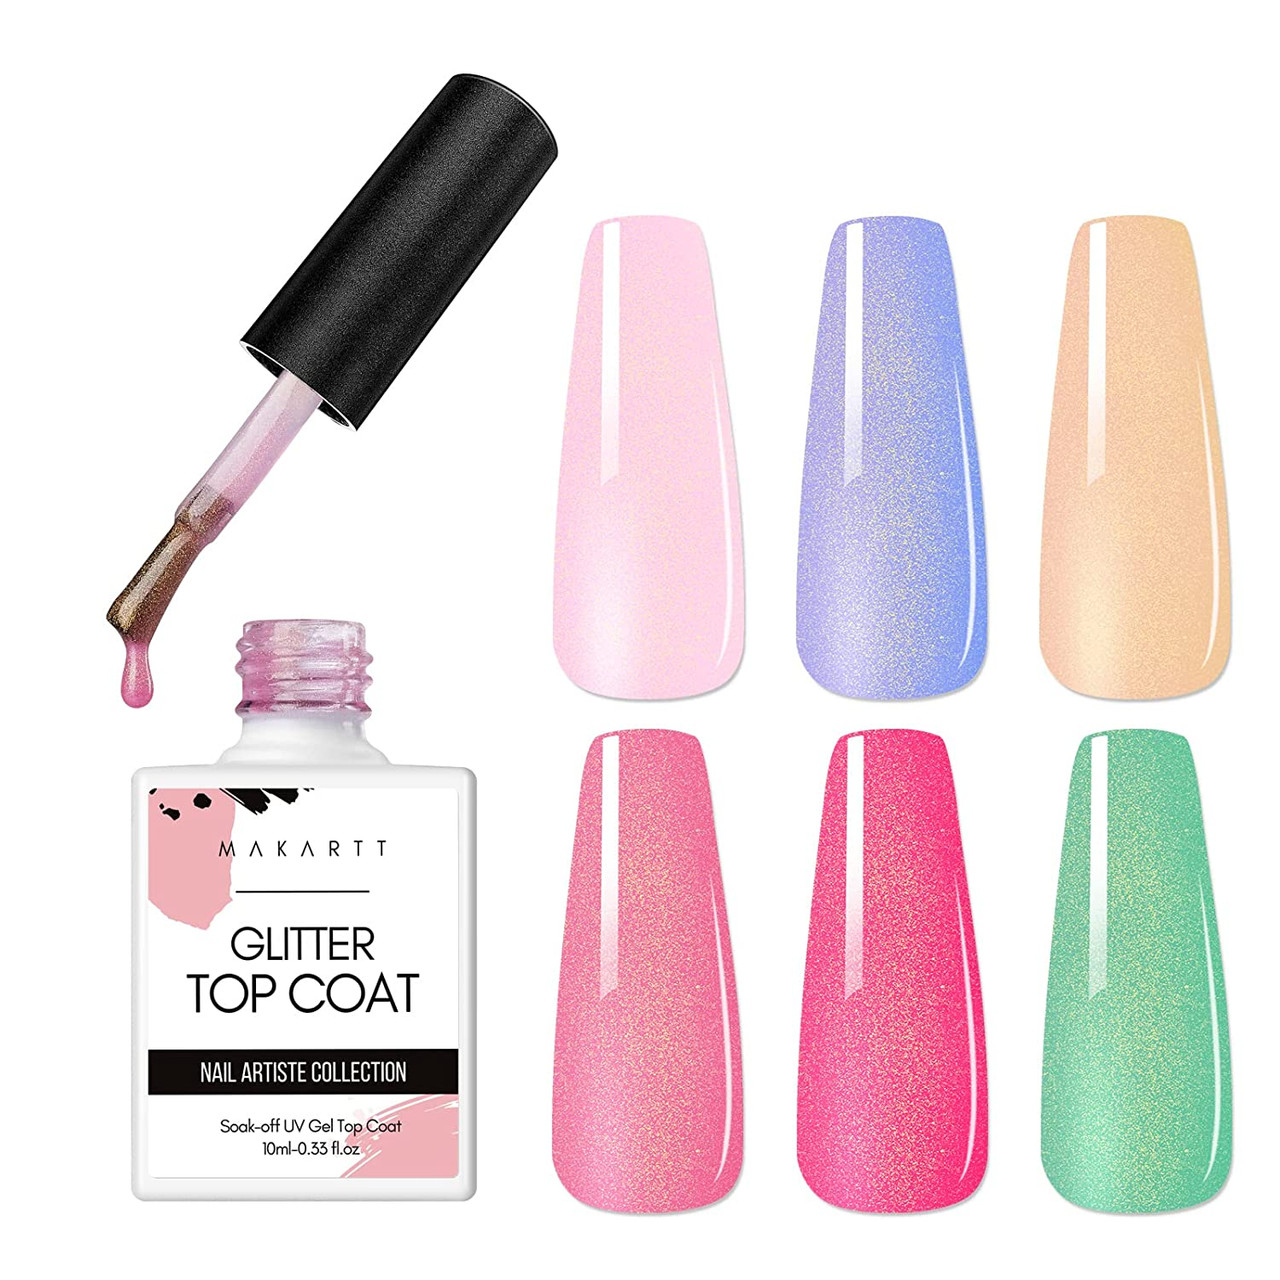 The Top On Coat Press On Nails – Top Coat Press On Nails